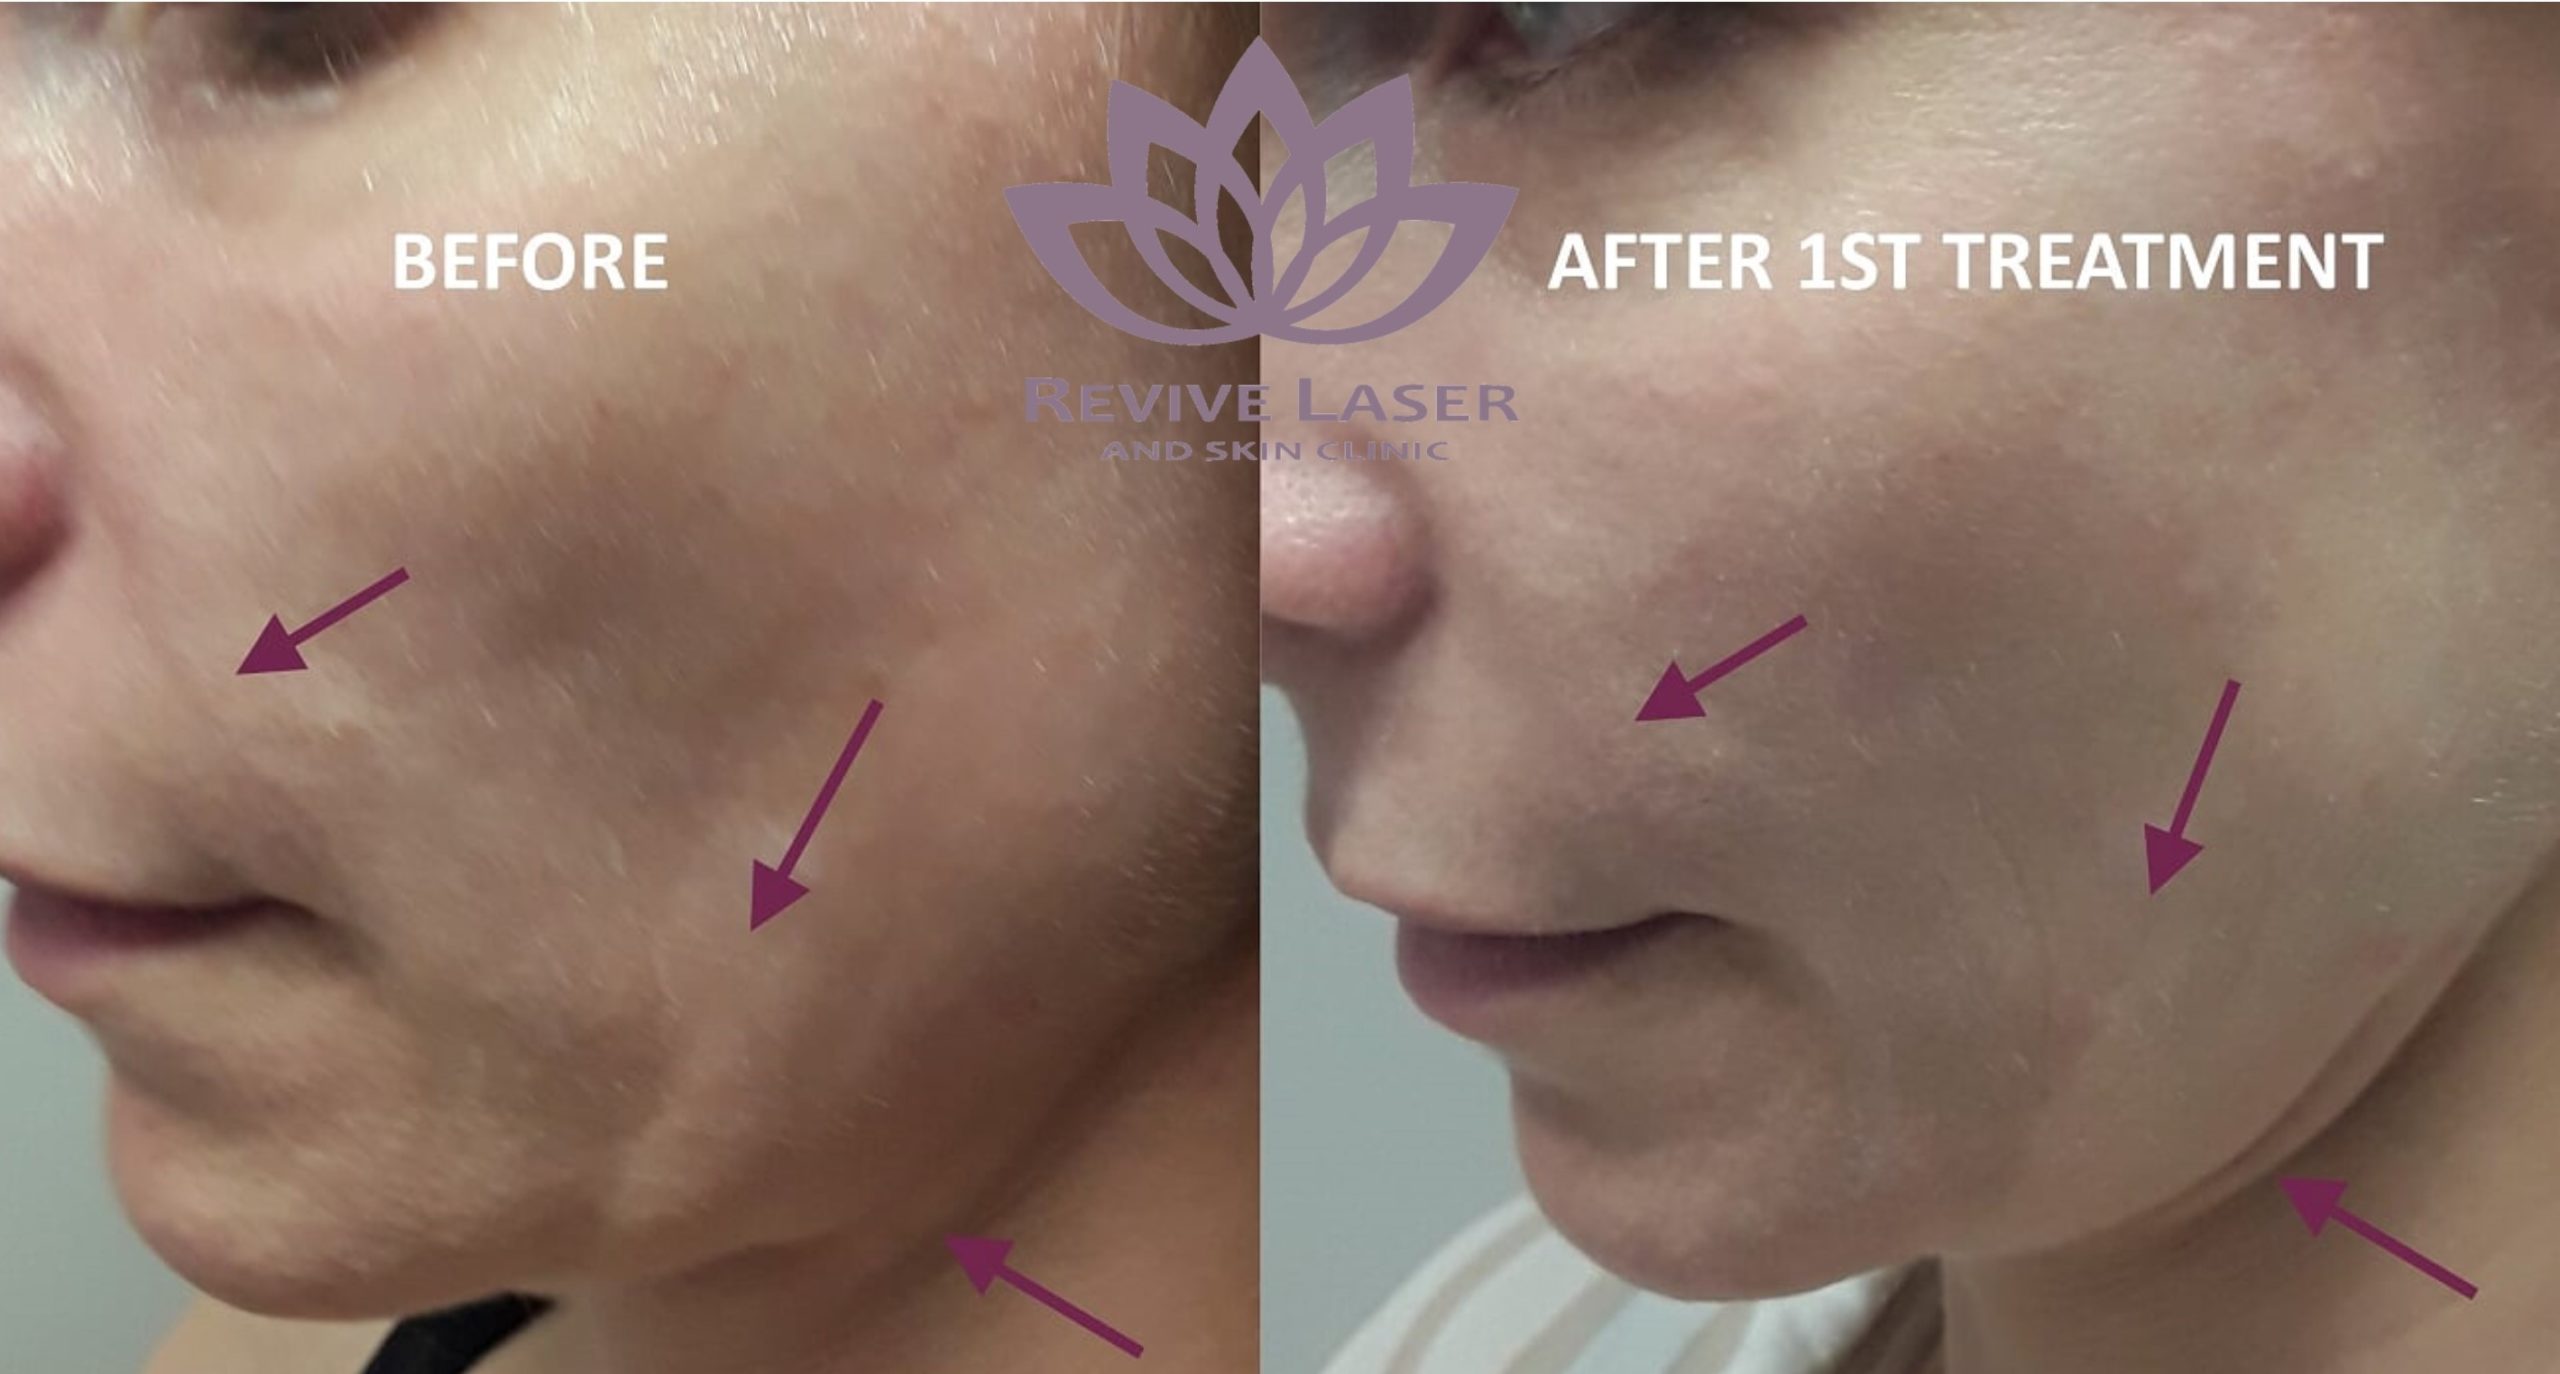 Laser Skin Tightening Before And After Revive Laser And Skin Clinic